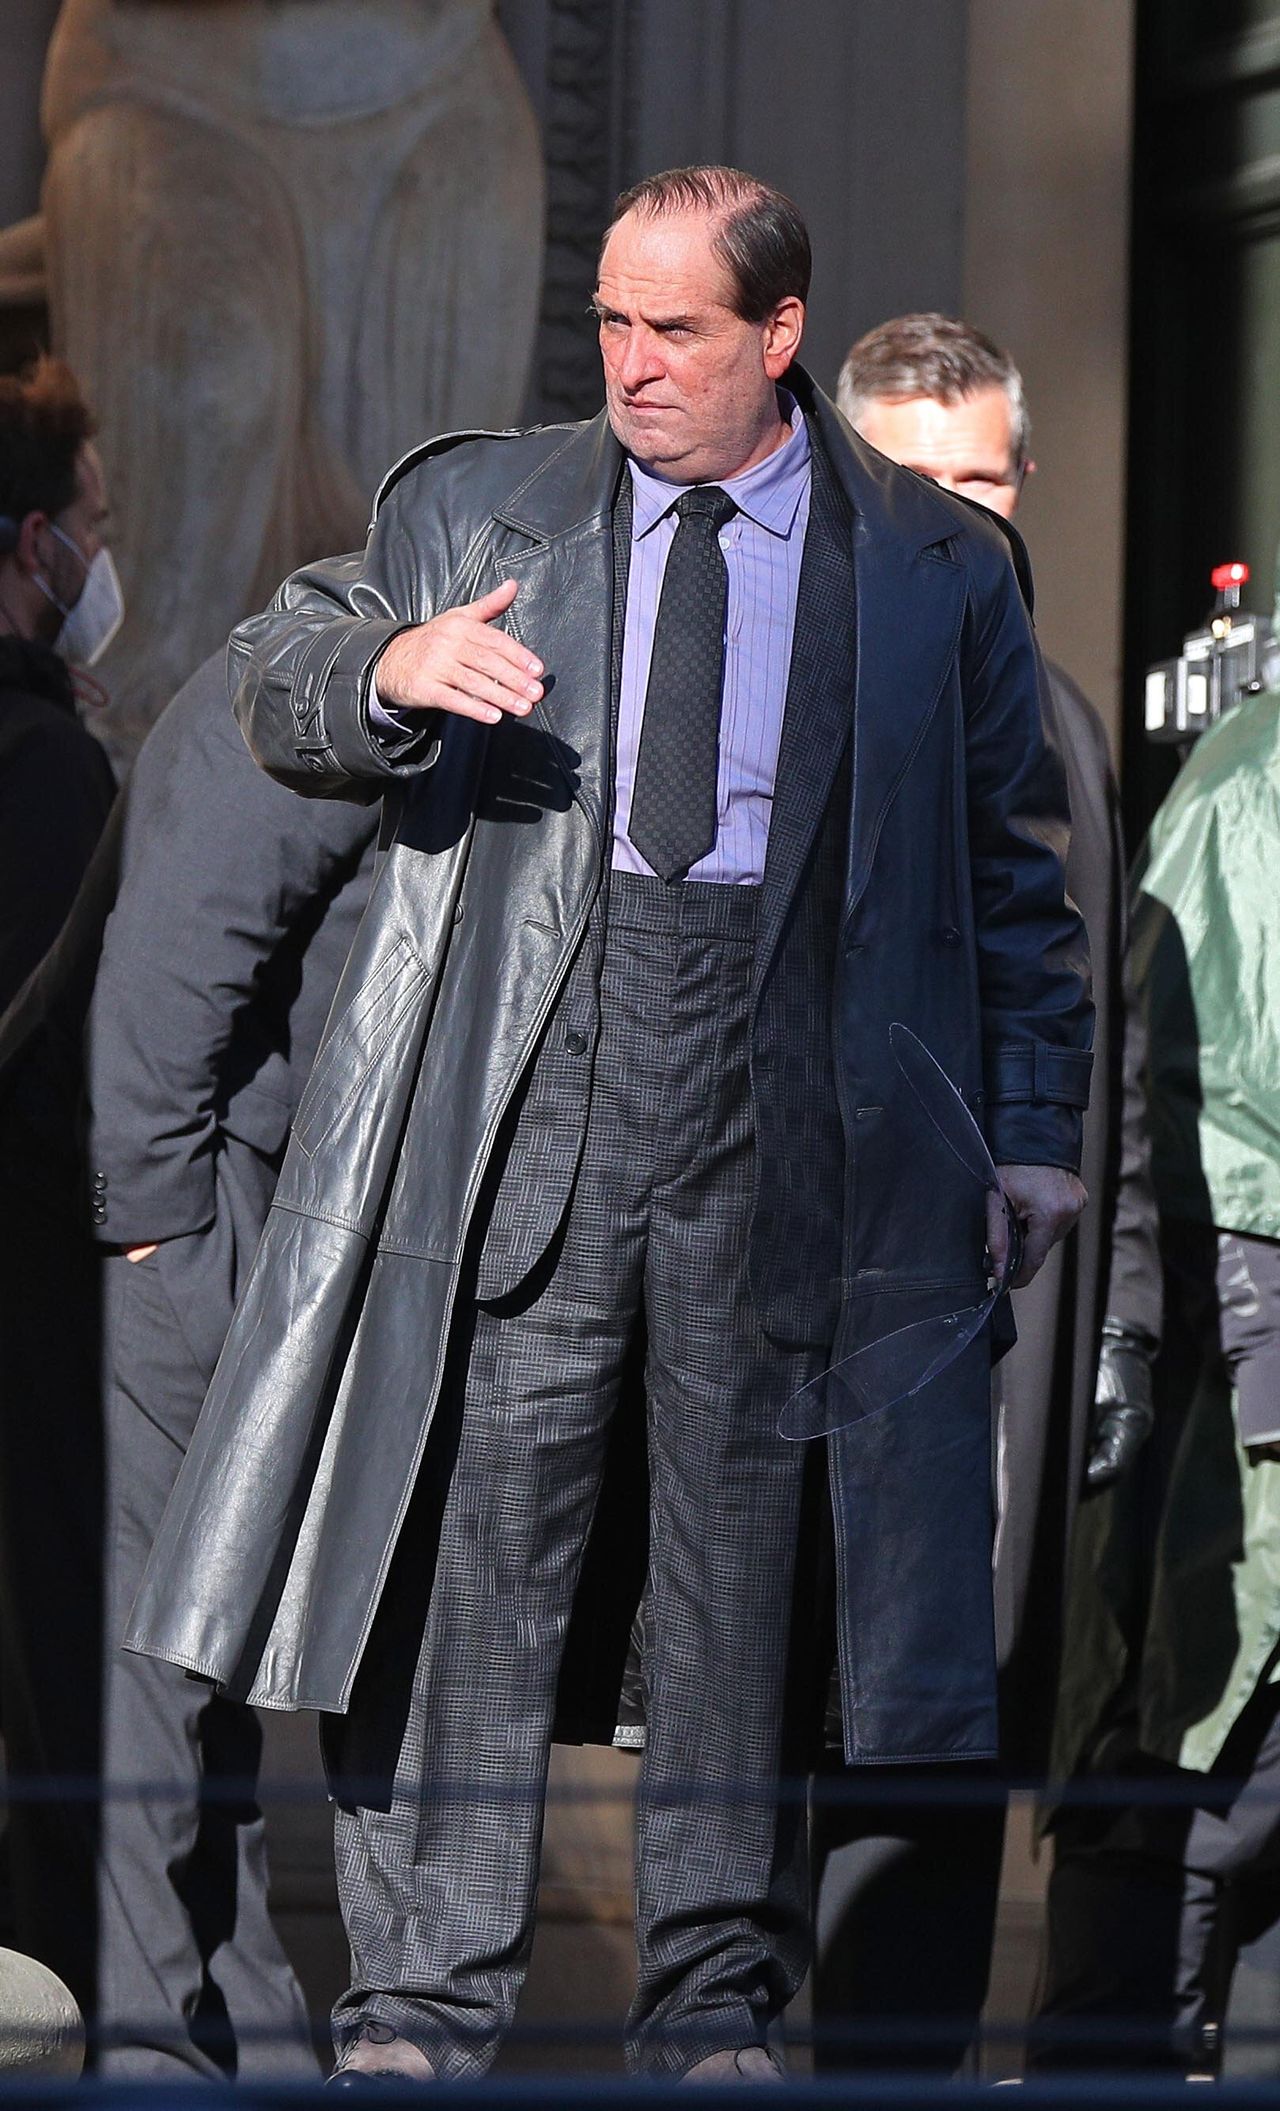 Colin Farrell during the filming of The Batman taking place in Liverpool.